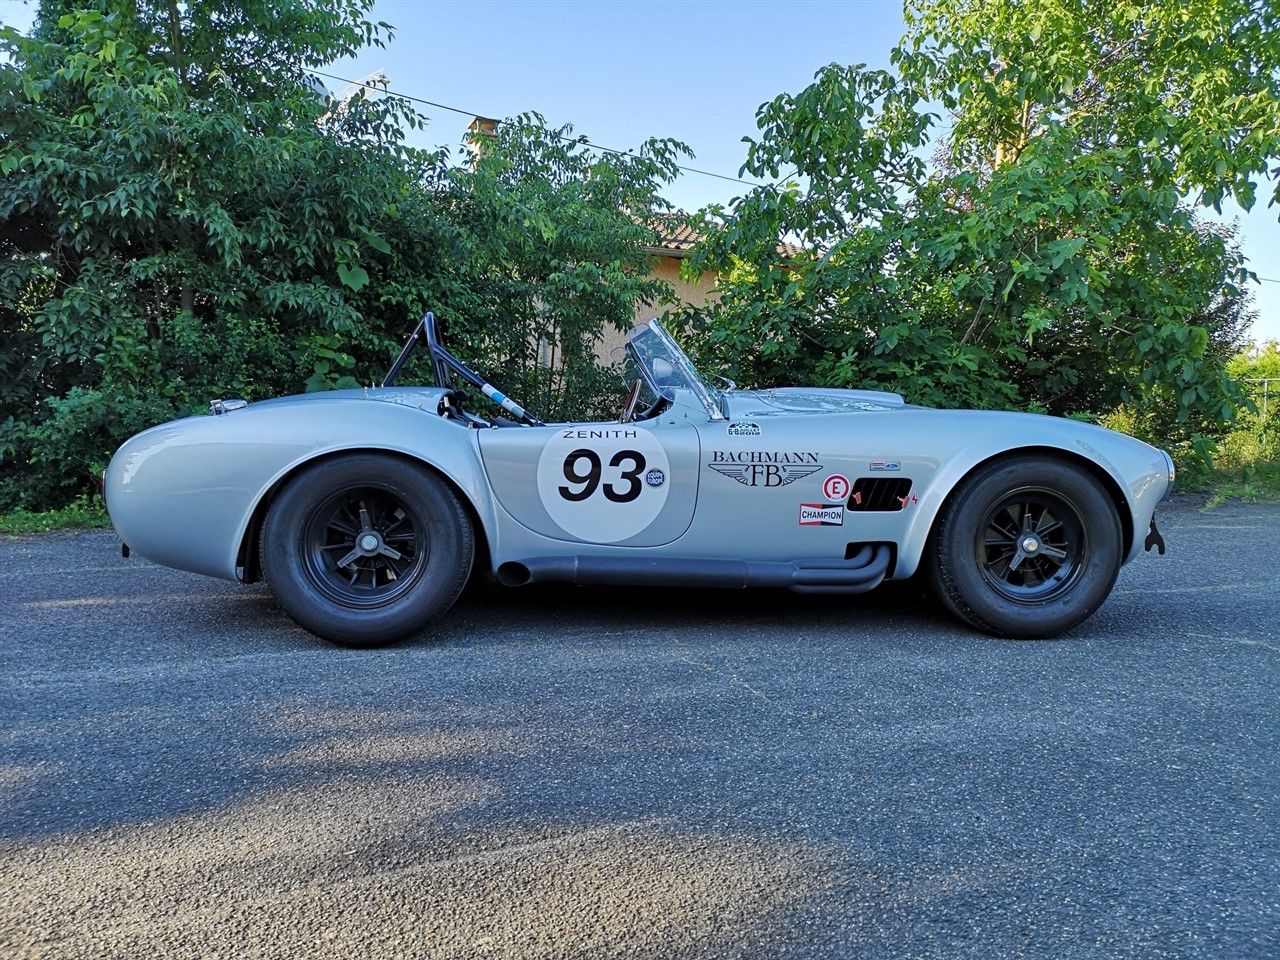 SHELBY COBRA 427 FIA – 1966 Serial number: CSX3192

After the formidable 289, Sh&hellip;